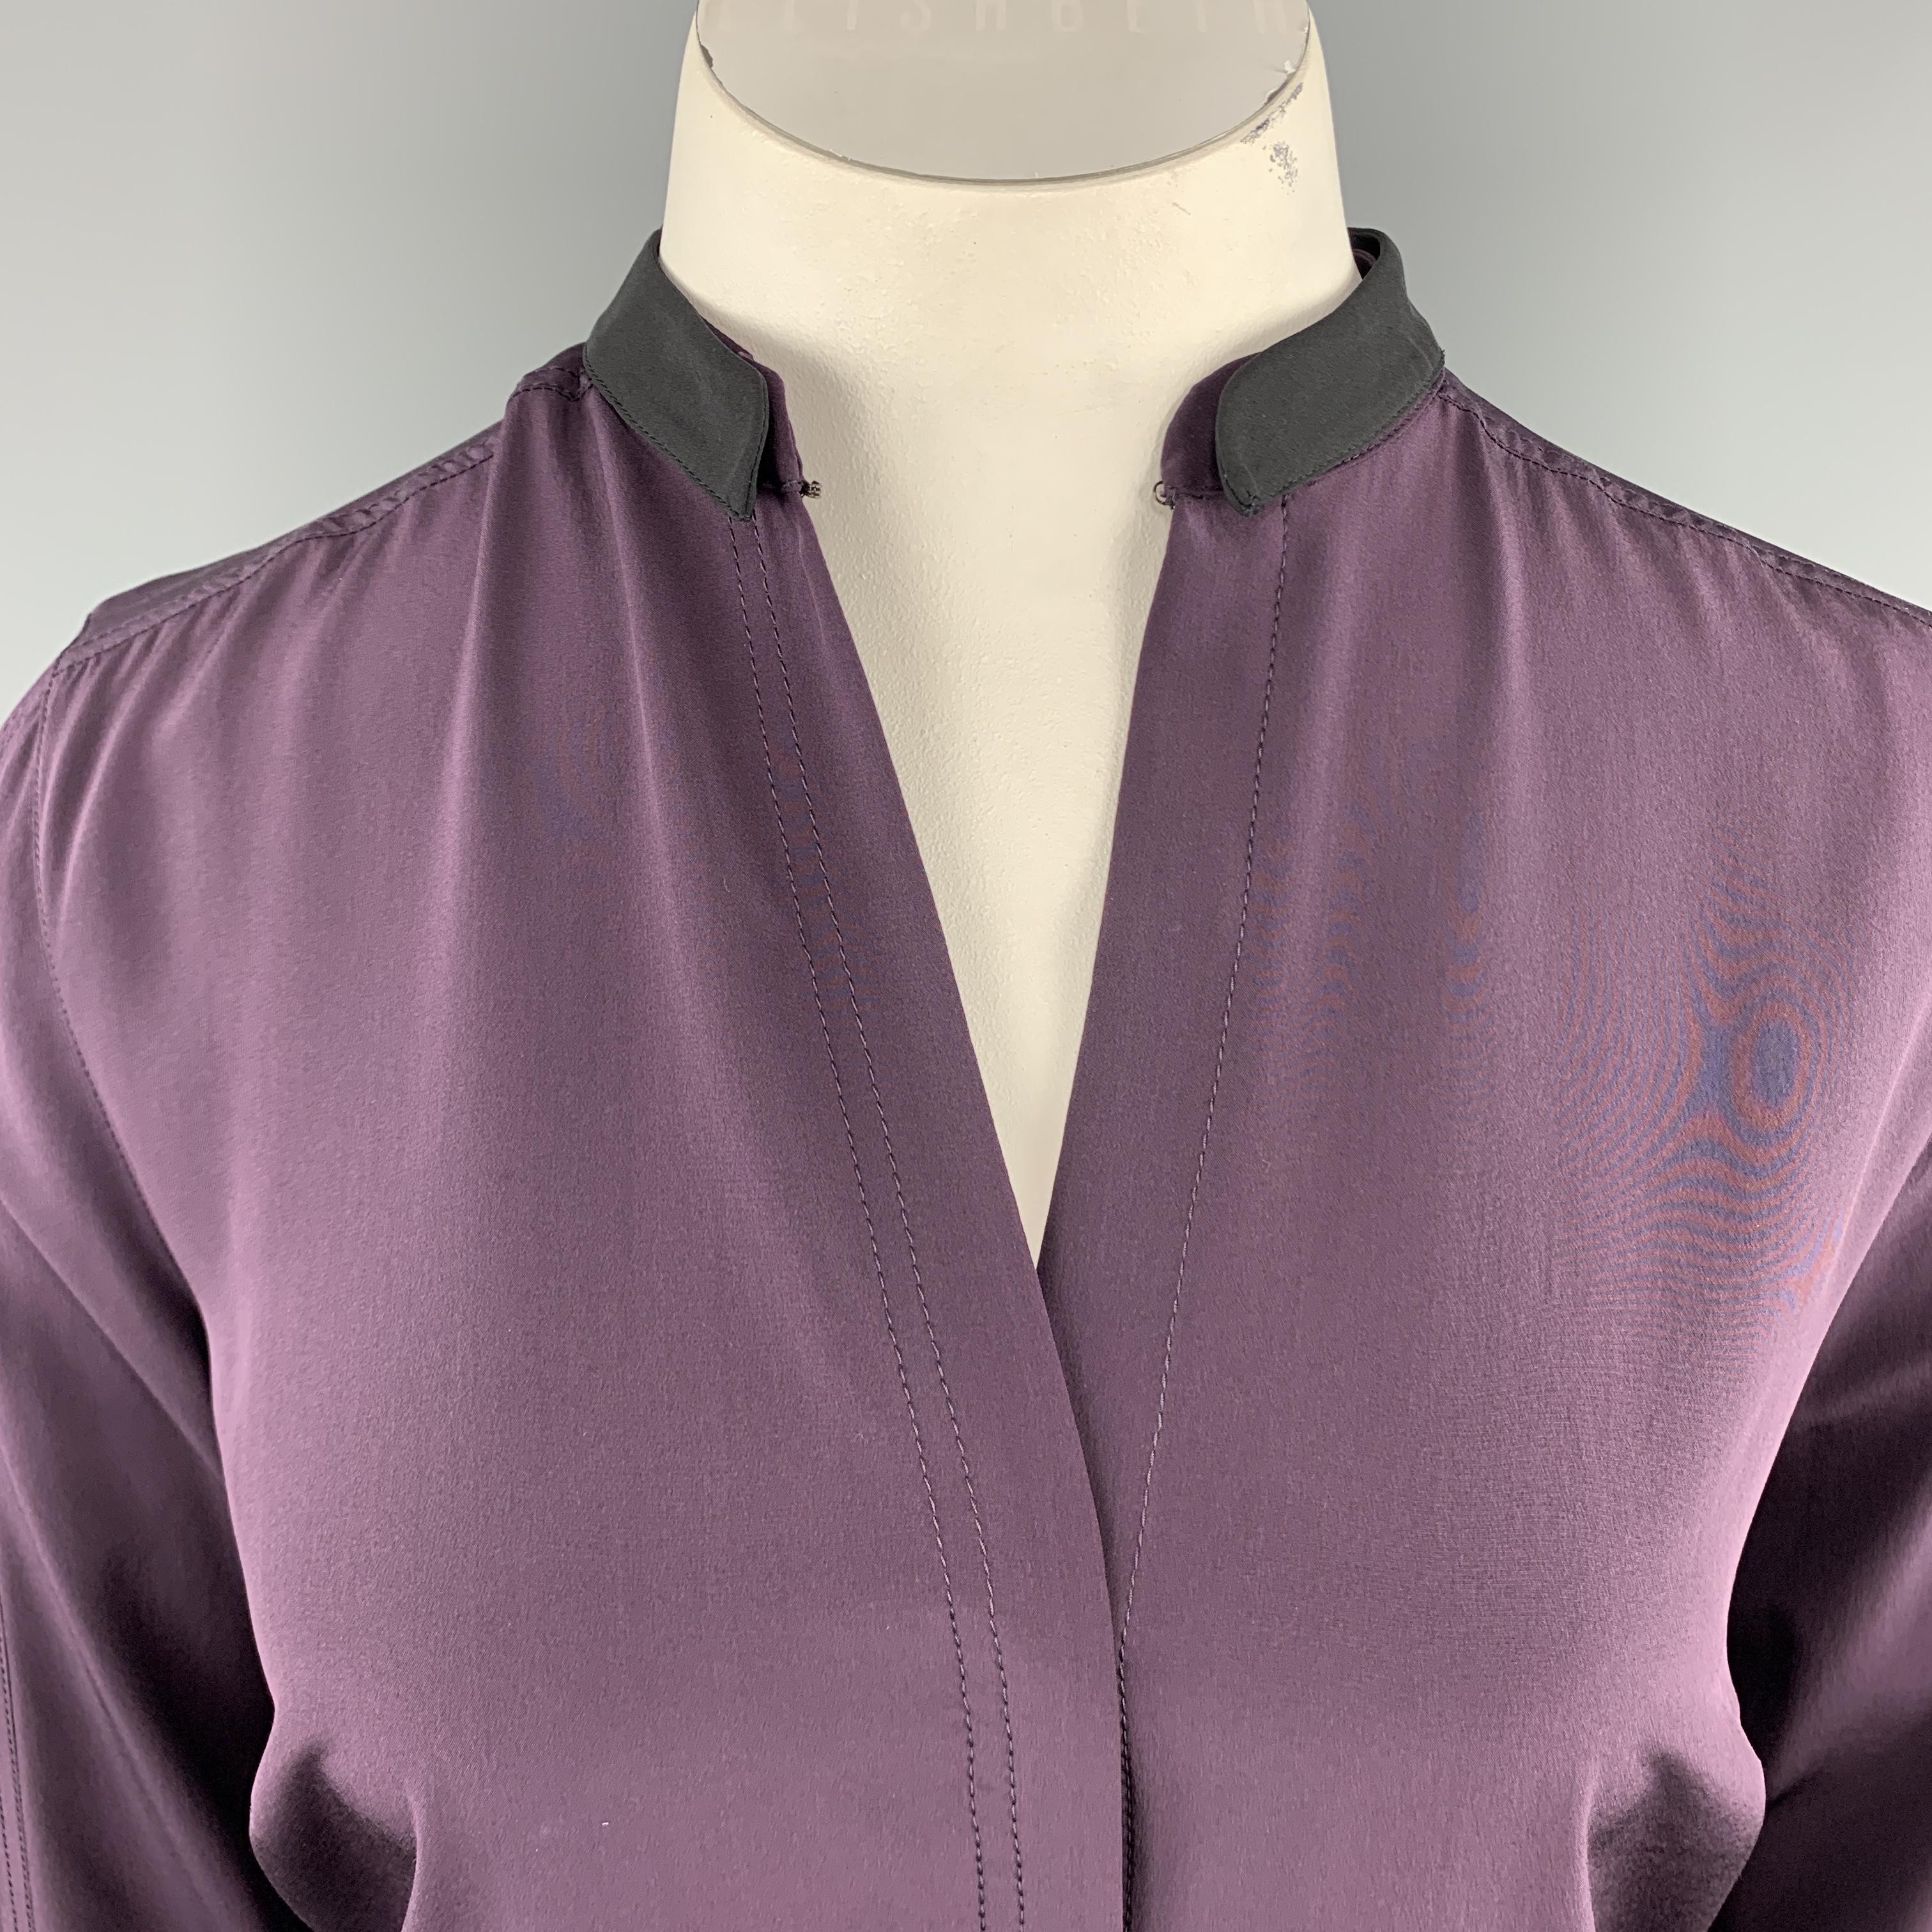 AKRIS blouse comes in plum purple silk with a hidden placket button up closure, detachable black band collar, and bi level hem. Wear it open as a V neck or use hook eye at collar t close. 

Excellent Pre-Owned Condition.
Marked: